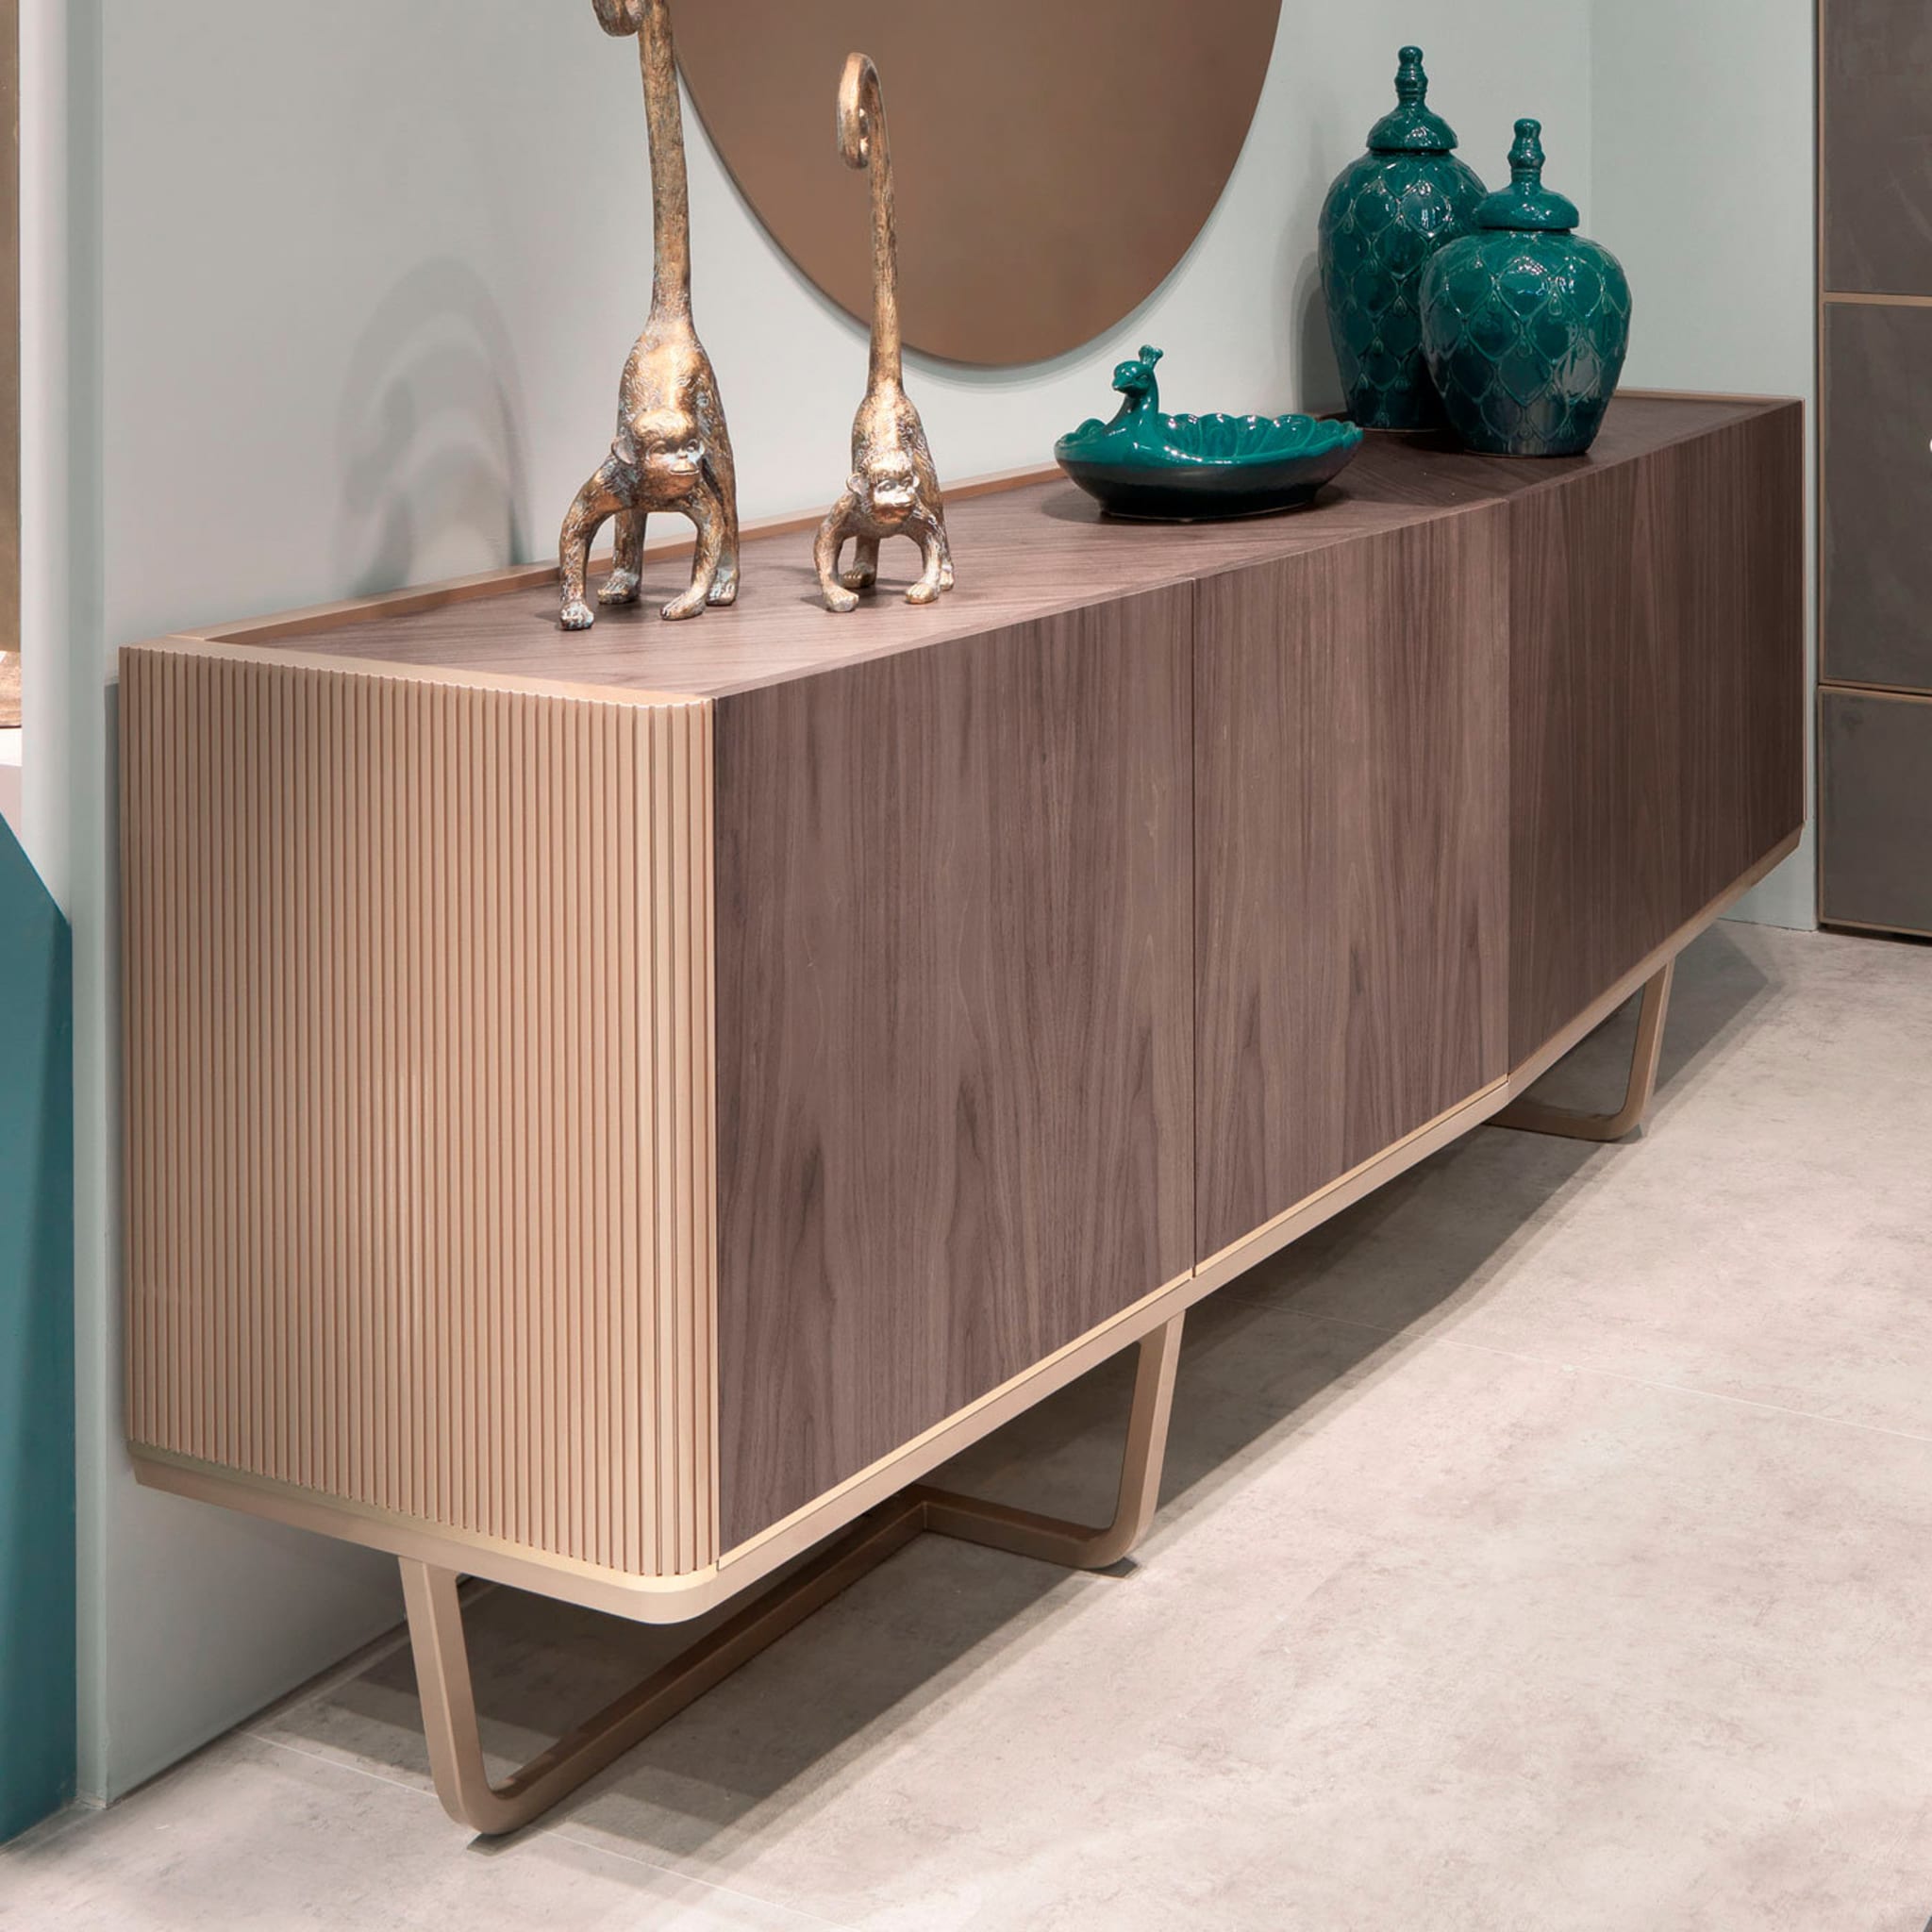 Beverly 4-Door Canaletto Sideboard by Silvano Del Guerra - Alternative view 2